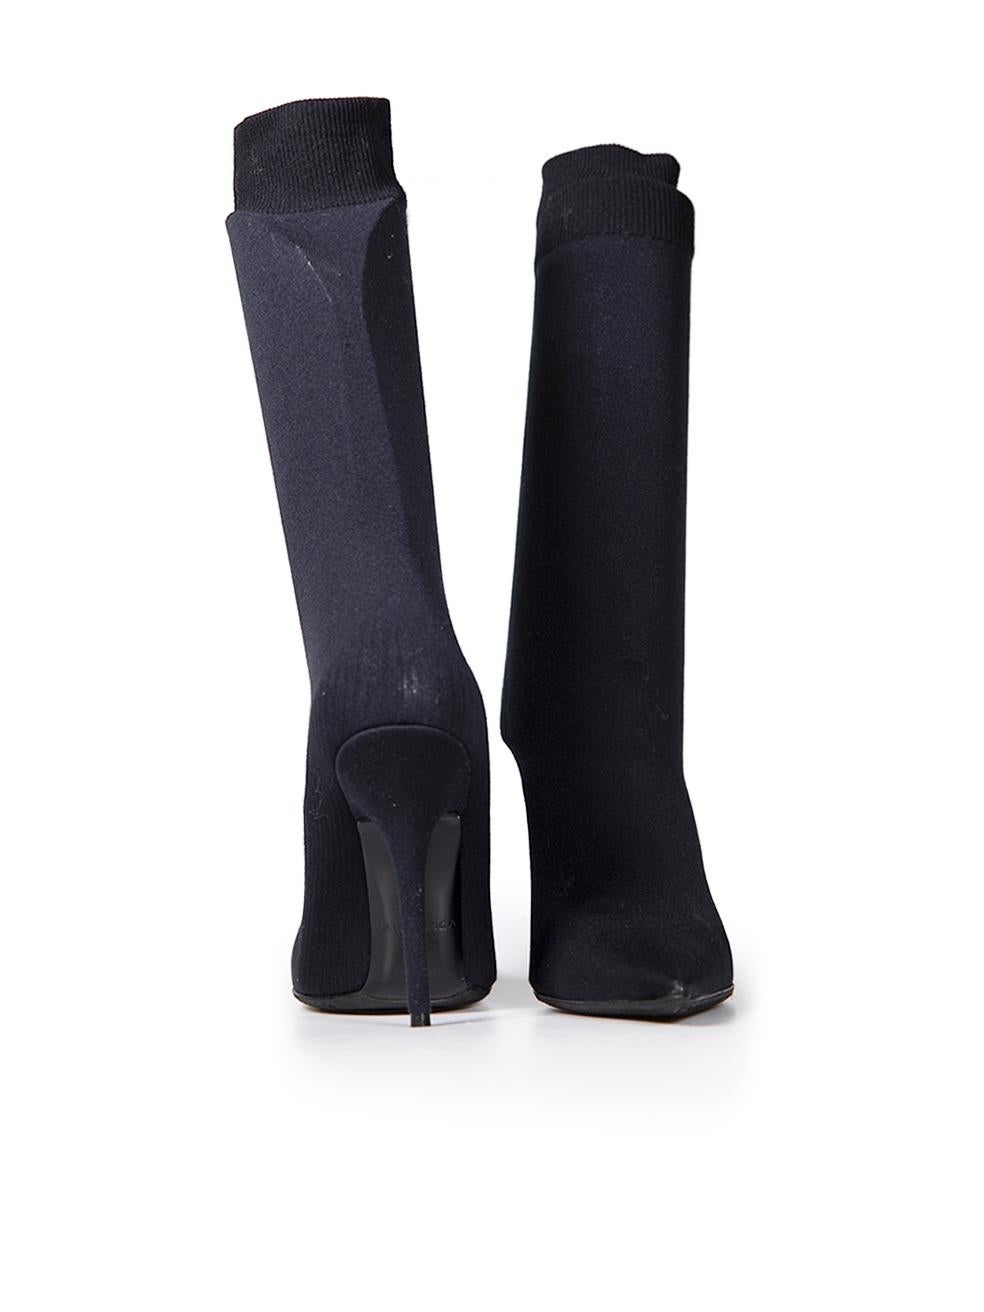 Balenciaga Black Knife Ankle Sock Boots Size IT 39 In Good Condition For Sale In London, GB